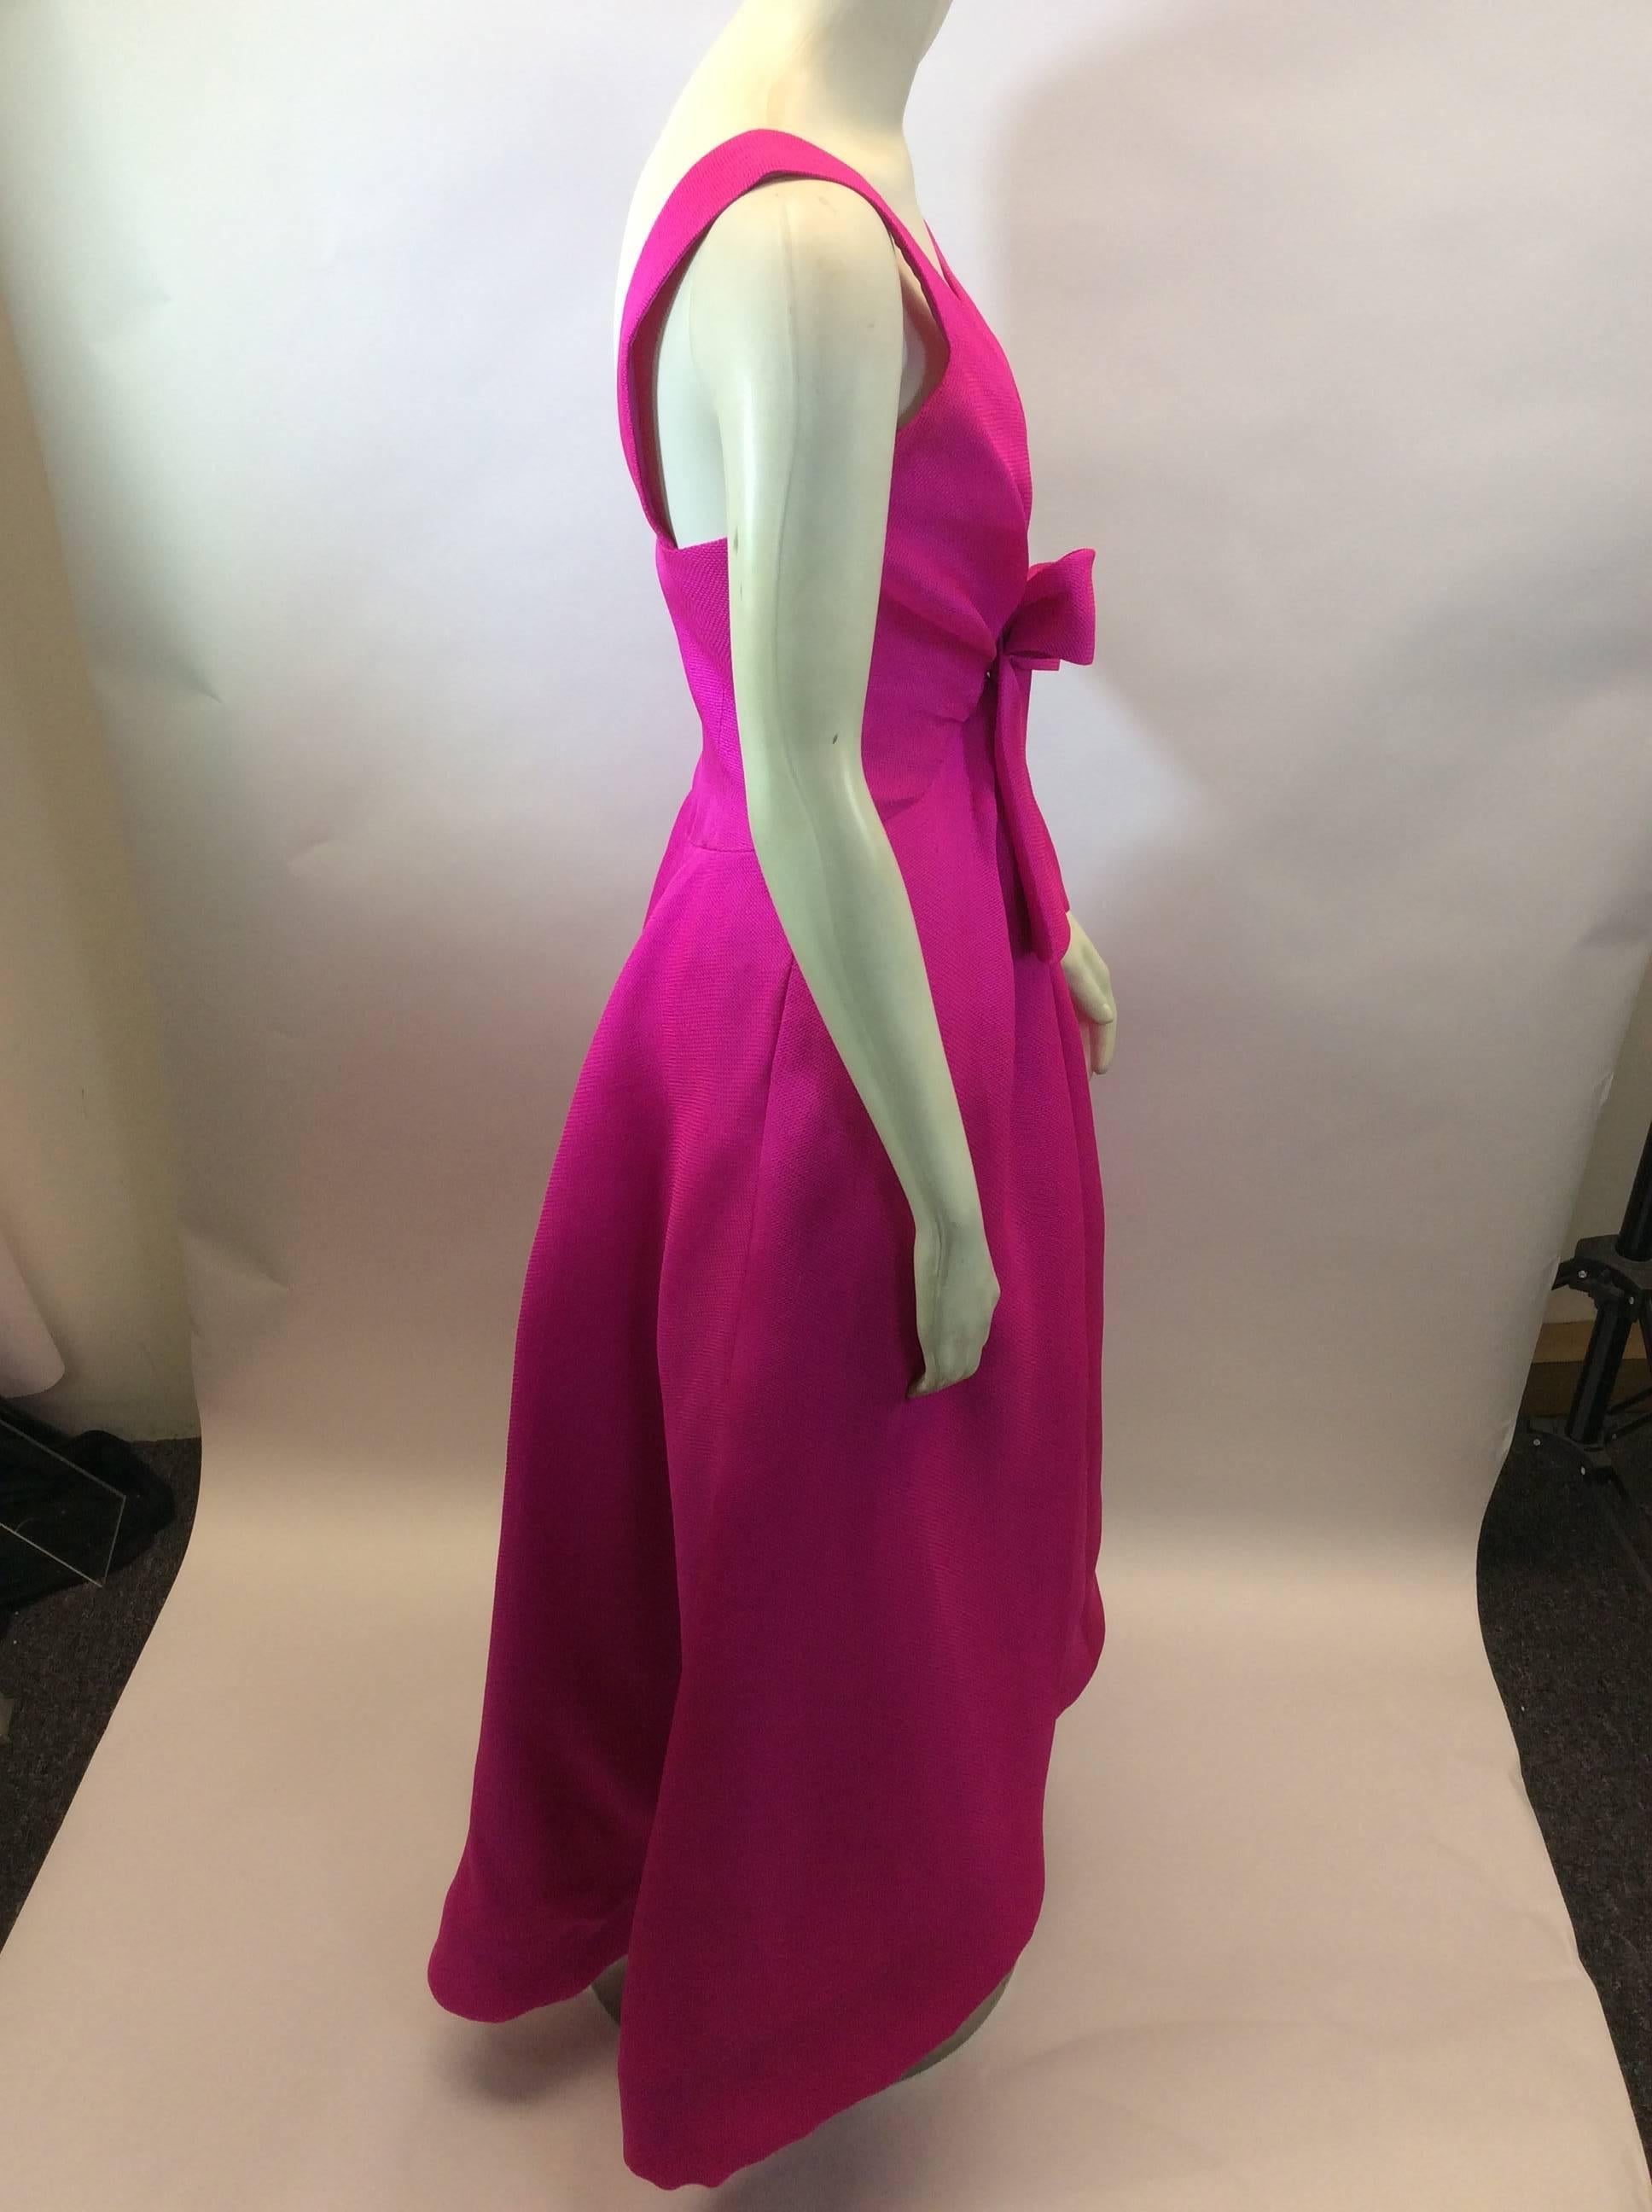 Scassi Vintage Fuchsia Formal Gown In Excellent Condition For Sale In Narberth, PA